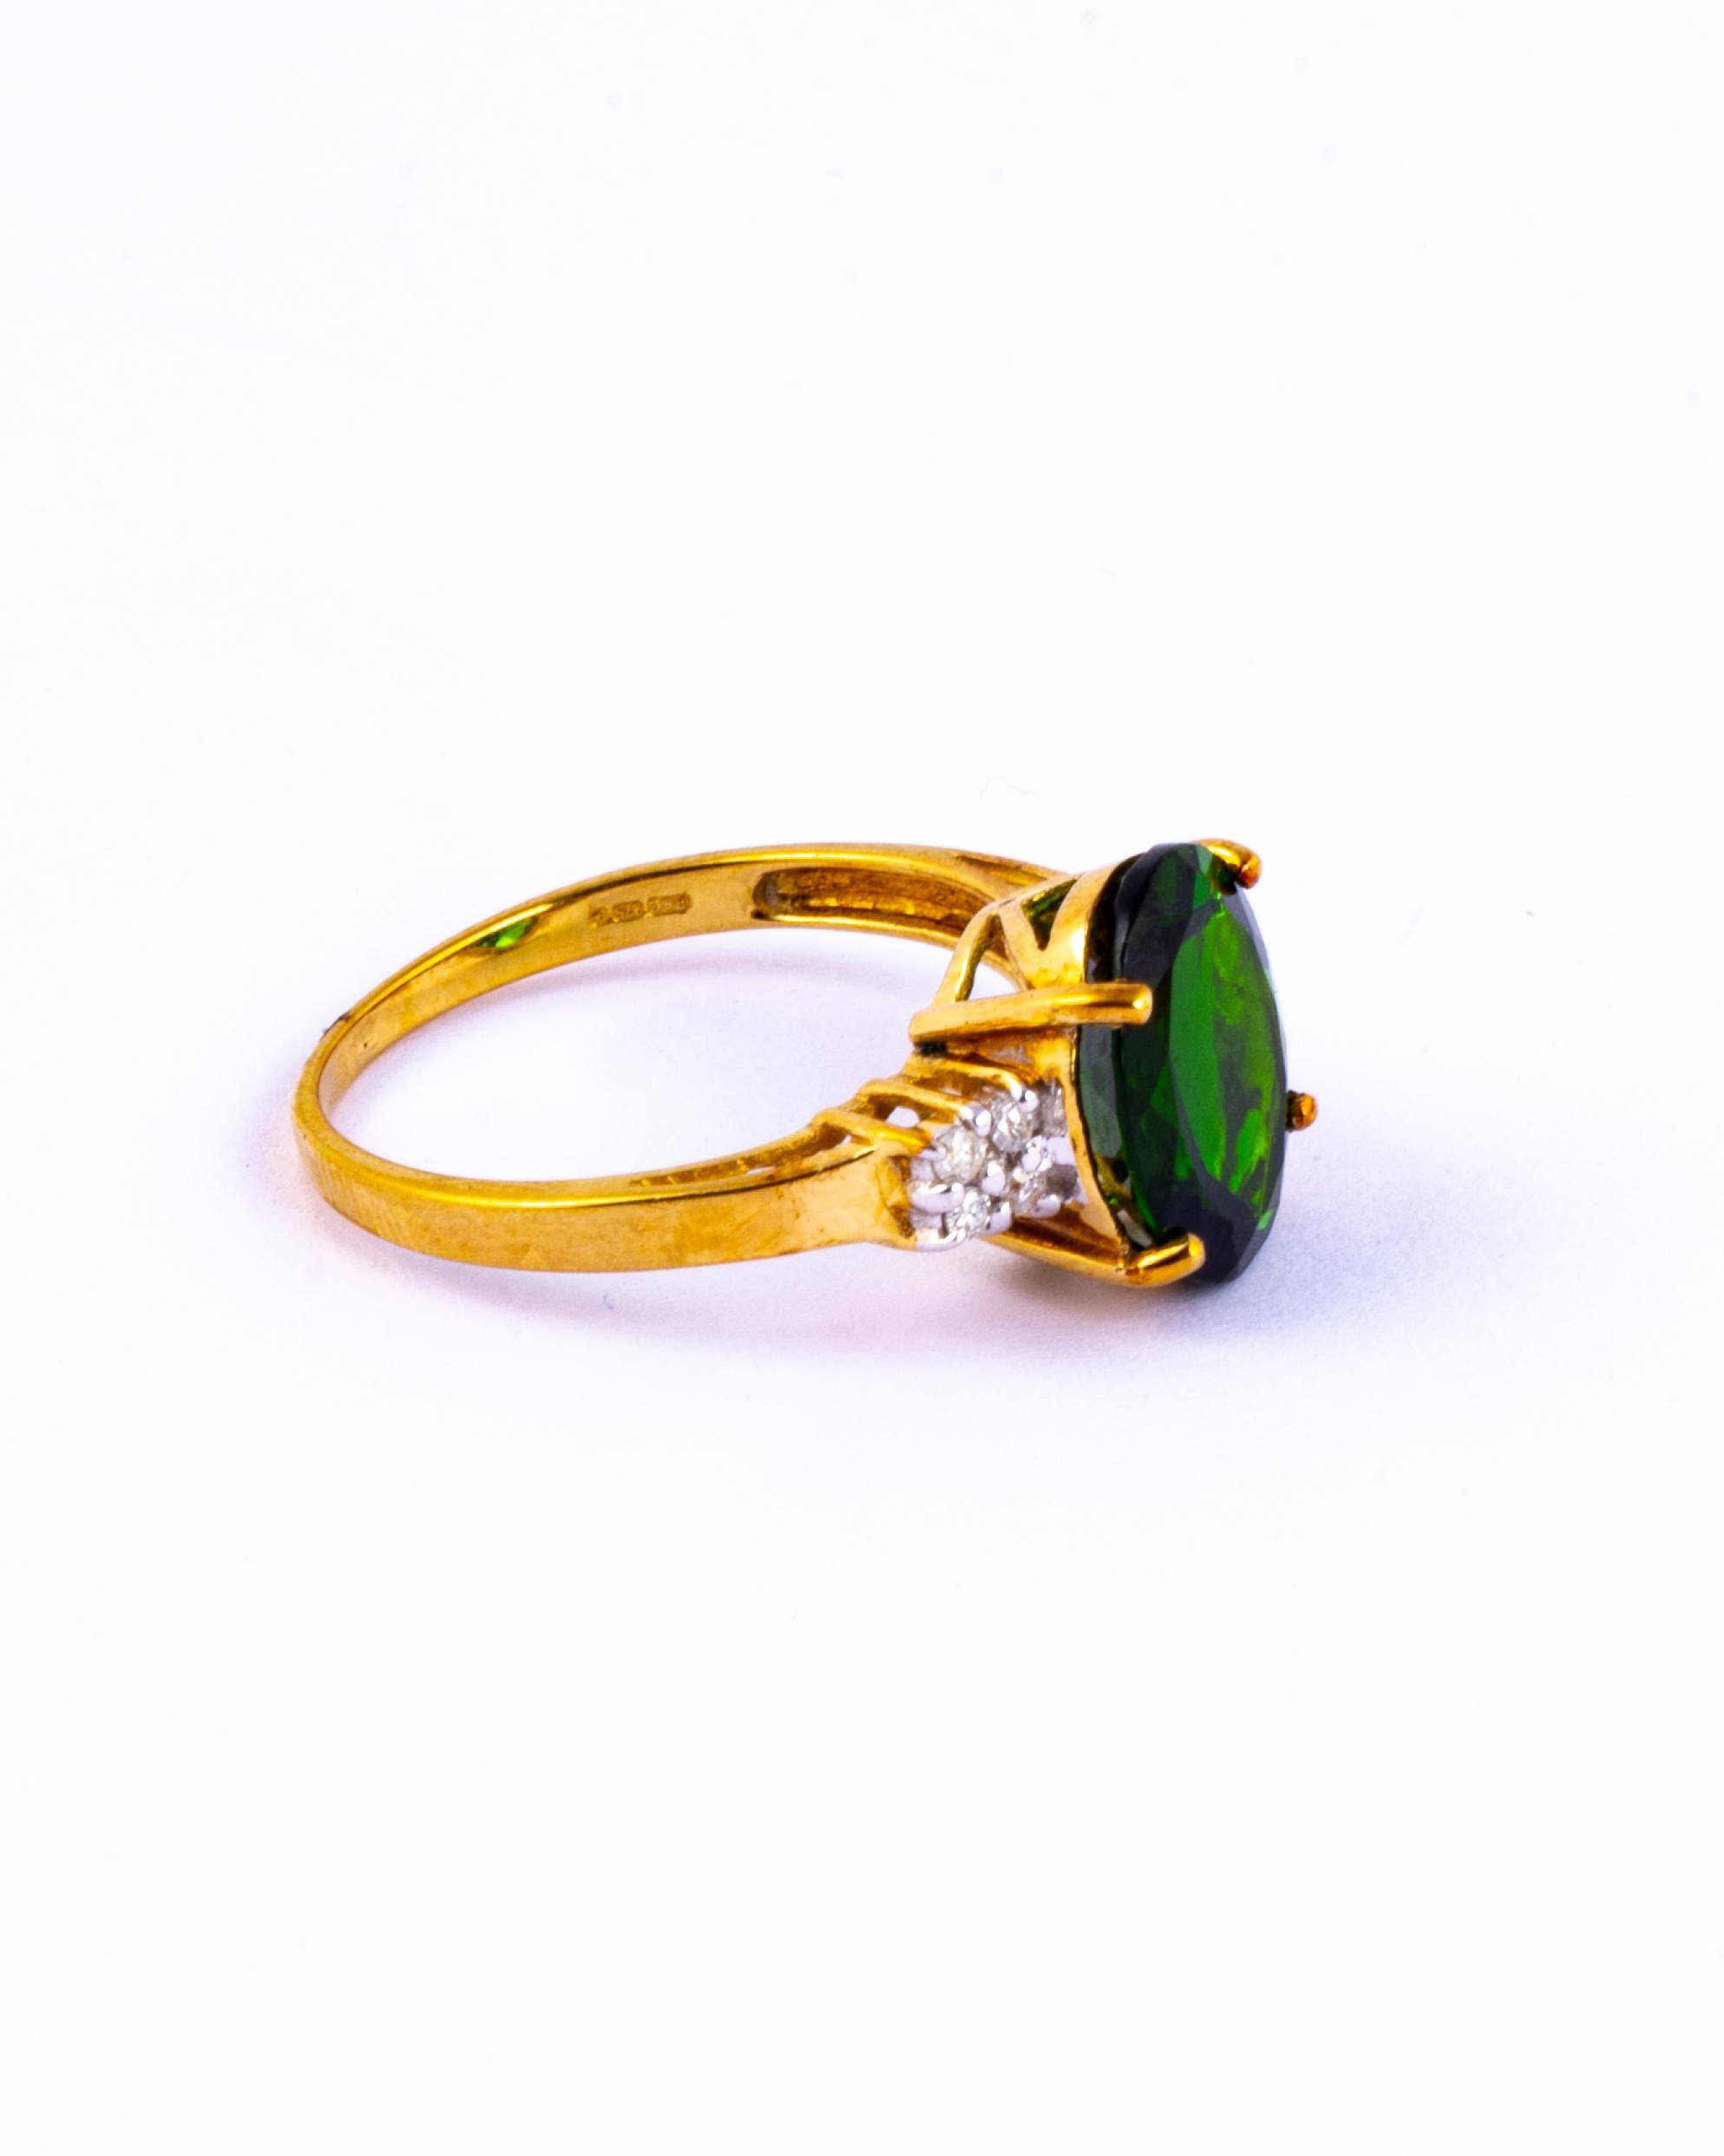 The deep green diopside sits perched up high on a simple claw setting with an open work gallery. The shoulders have diamonds which total approx 10pts. Modelled in 9ct gold. 

Ring Size: N or 6 3/4 
Stone Dimensions: 11x9mm
Height Off Finger: 6.5mm